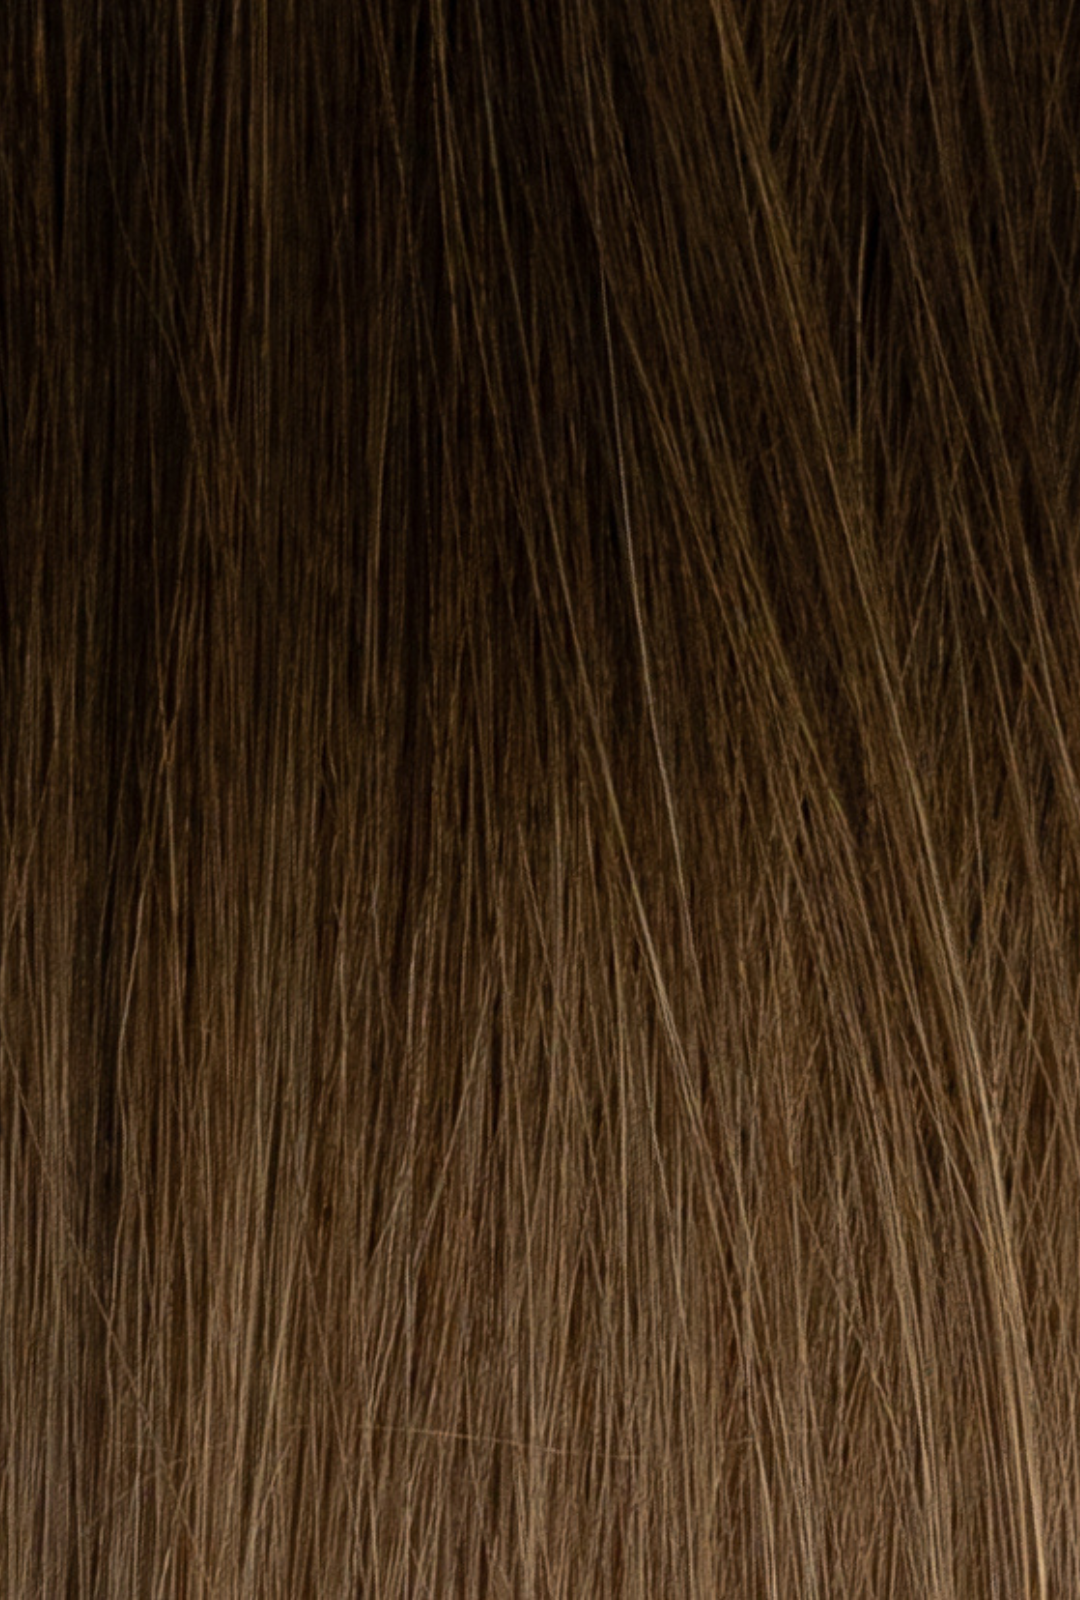 Laced Hair Hand Tied Weft Extensions Ombré #3/8 (Spiced Cider)